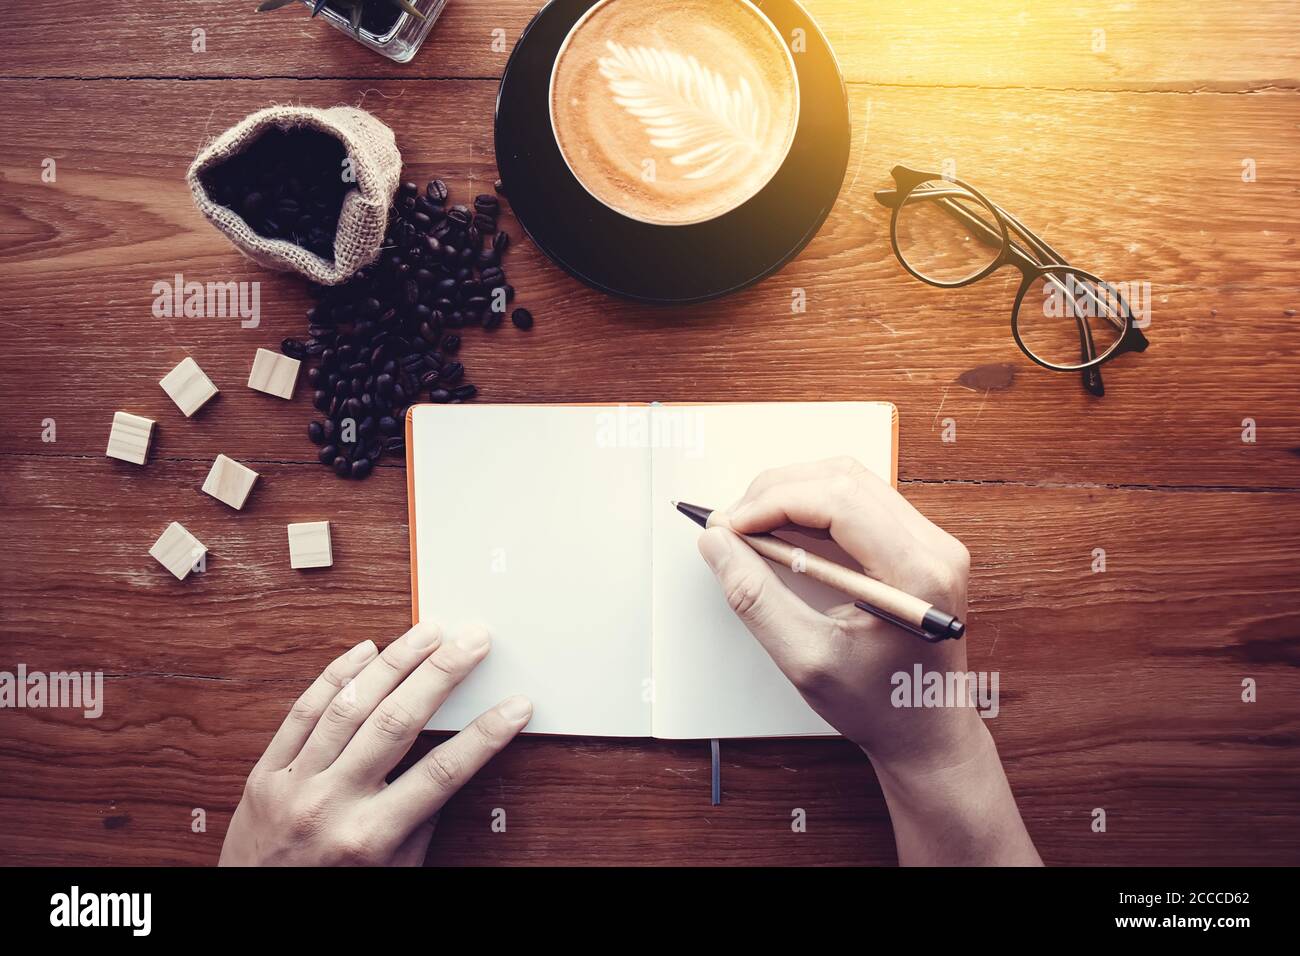 Education background concept : close up man with pencil in hand writing in notebook on wood table with coffee cup, top view. Vintage light effect. Stock Photo